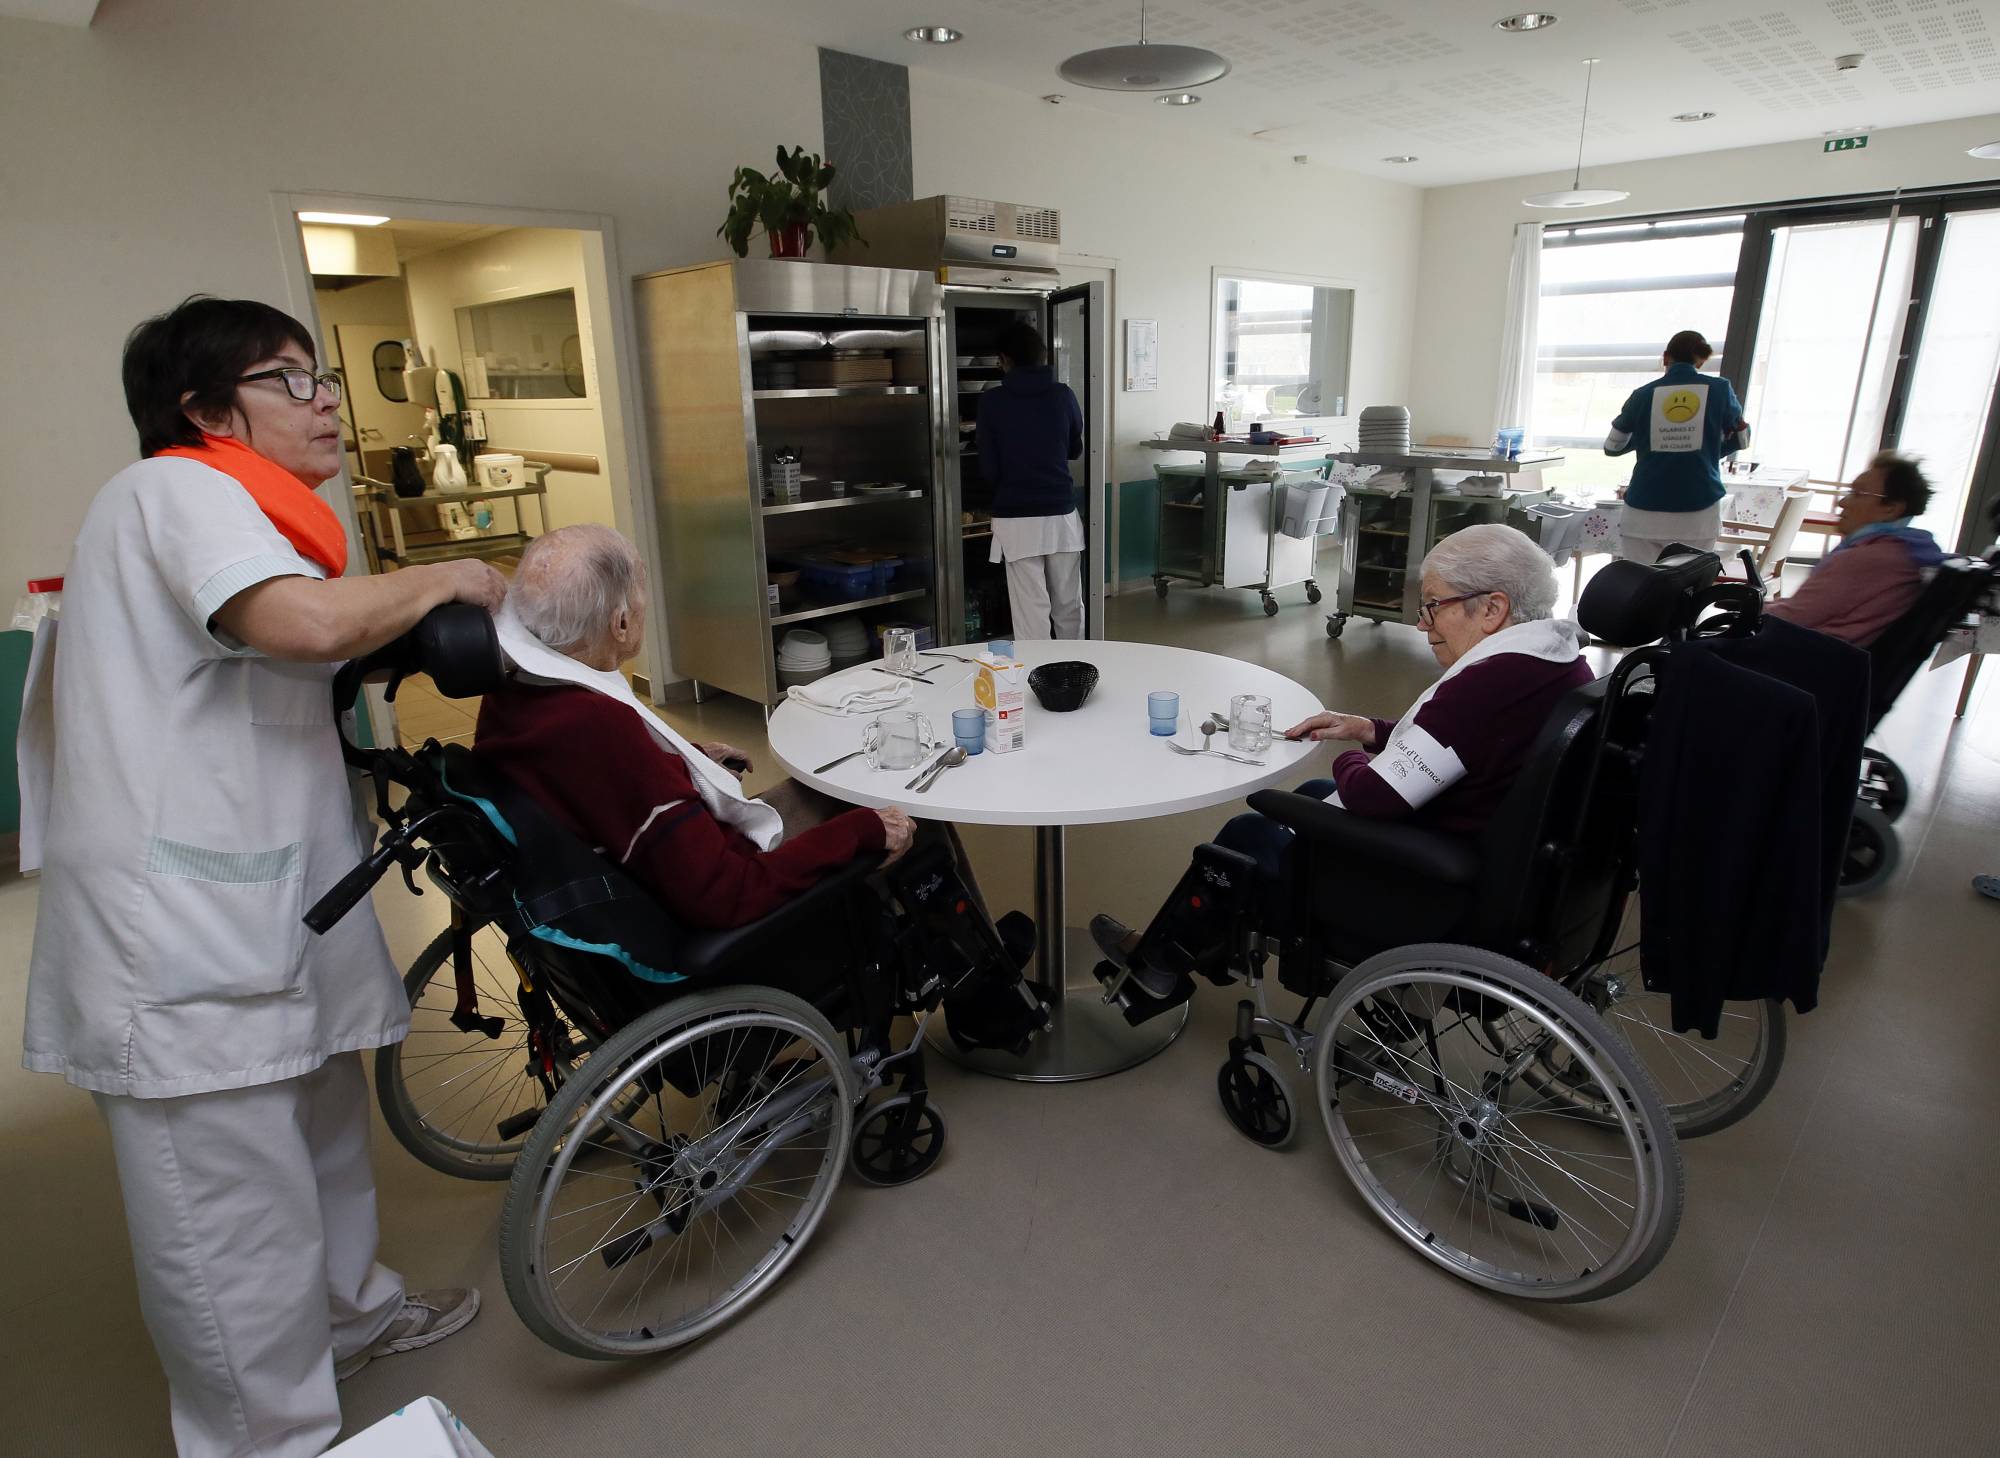 A care worker takes care to residents of the Maharin nursing home of Anglet, southwestern France, Tuesday, Jan.30, 2018. French care workers are protesting at nursing homes around the country in anger over staff shortages and cost cuts. Unions say workers are under increasing pressure to cut corners on feeding, cleaning and hygiene care for elderly residents. (AP Photo/Bob Edme)